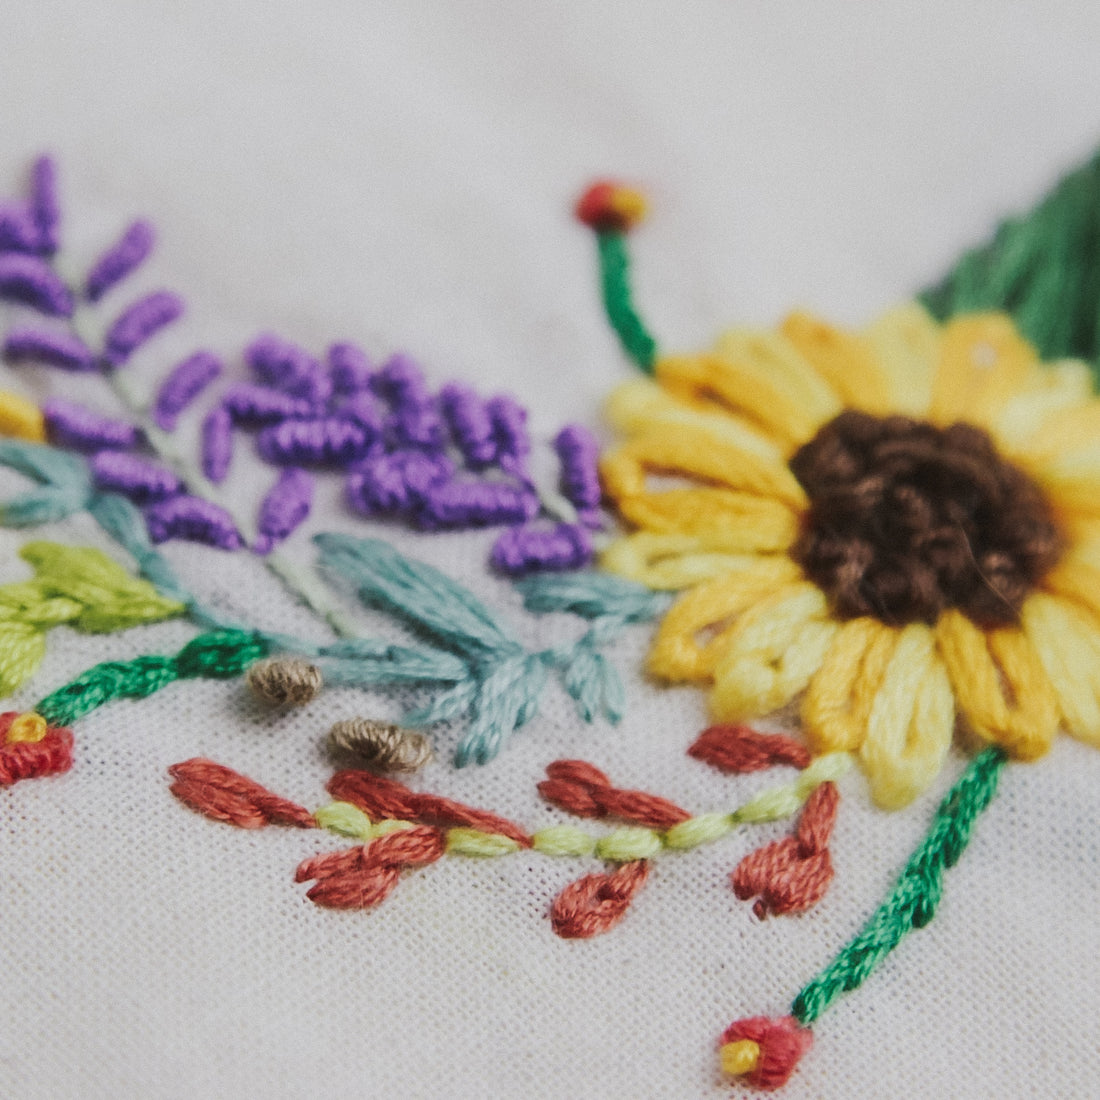 Hand Embroidery For Beginners - Design I have used in the video!